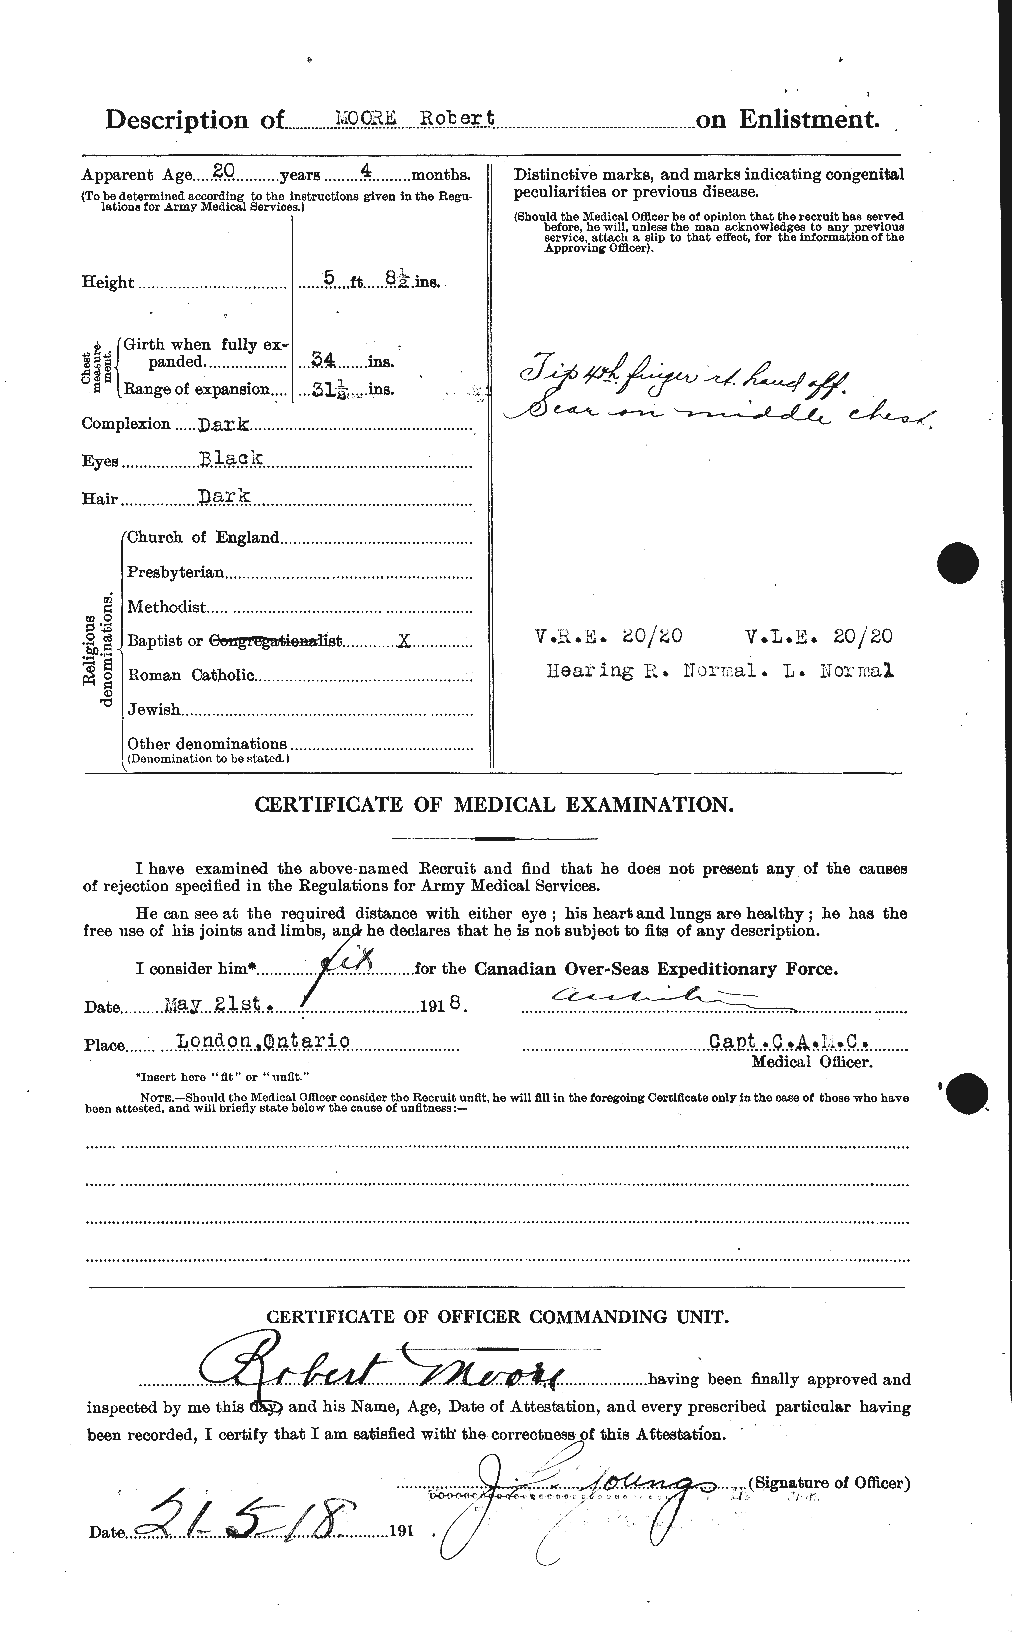 Personnel Records of the First World War - CEF 503550b